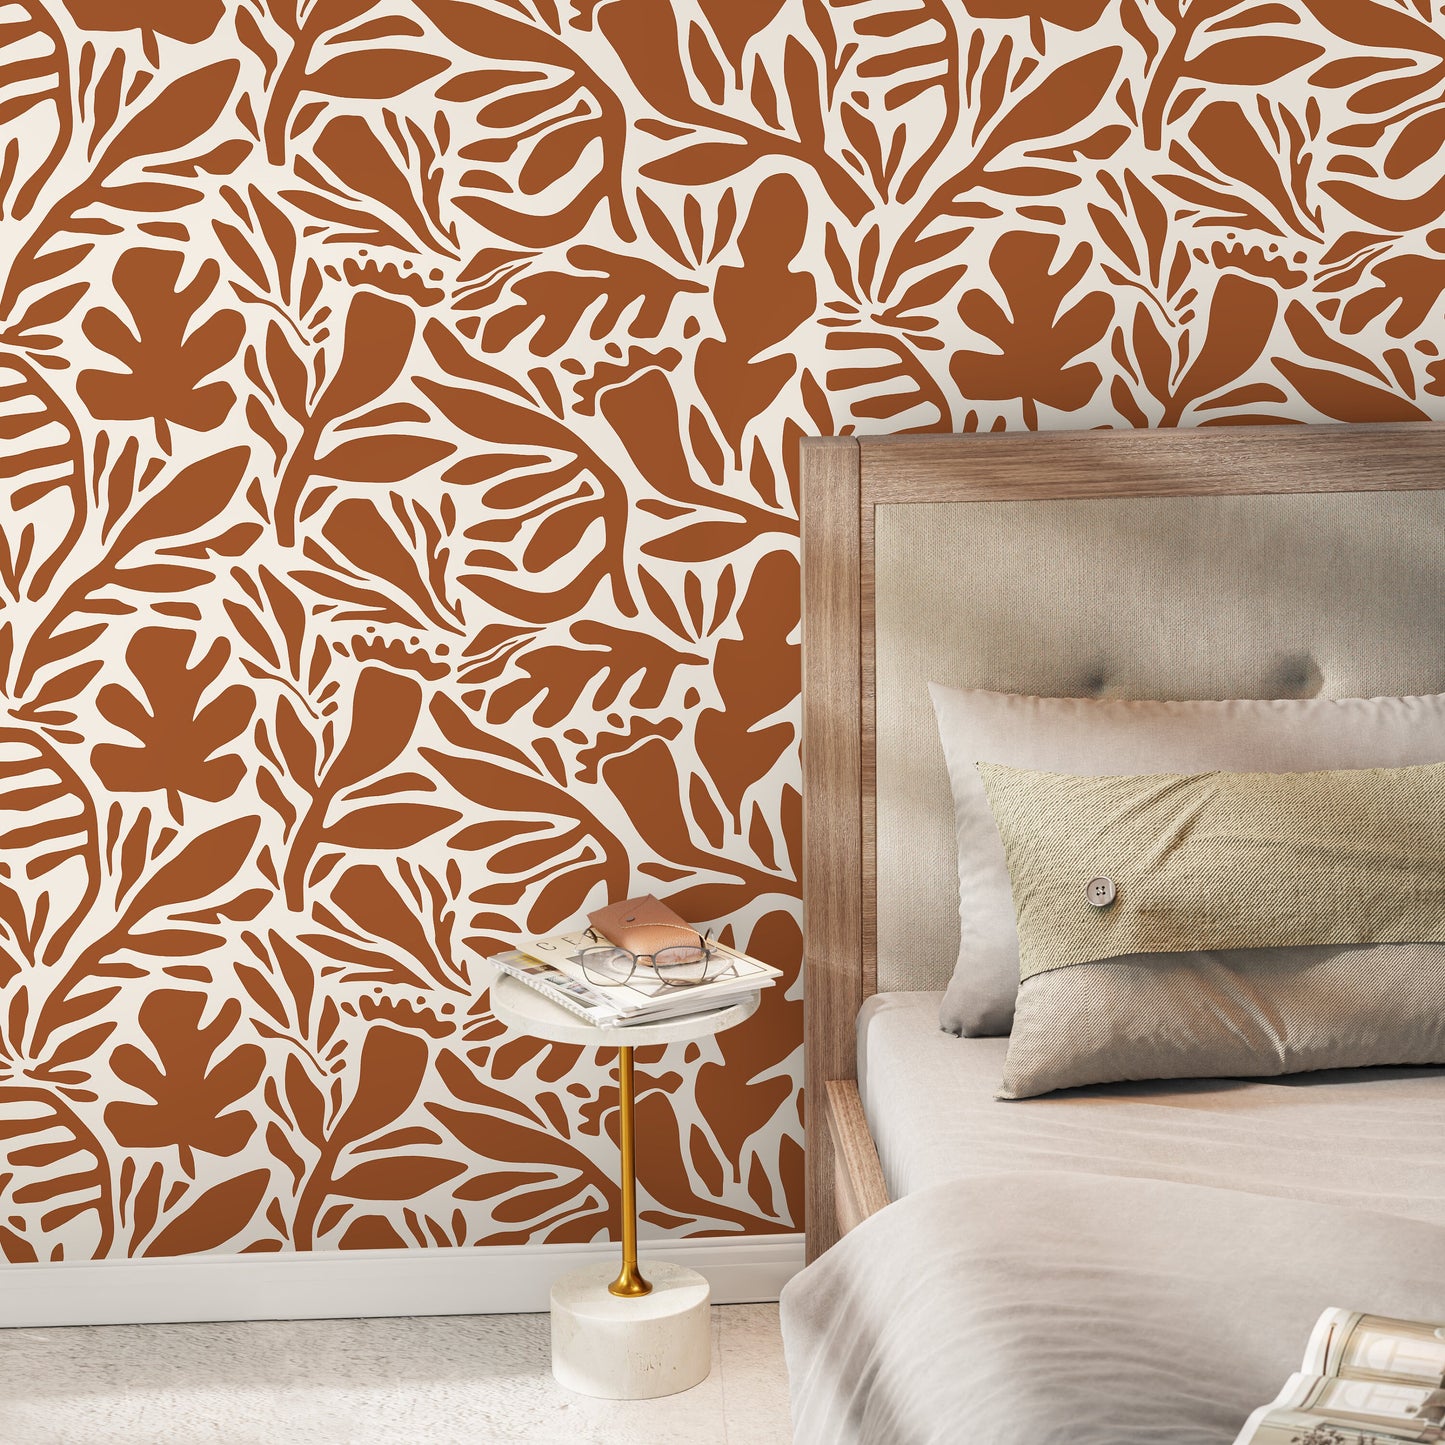 Terracotta Leaves Wallpaper Abstract Wallpaper Peel and Stick and Traditional Wallpaper - D698